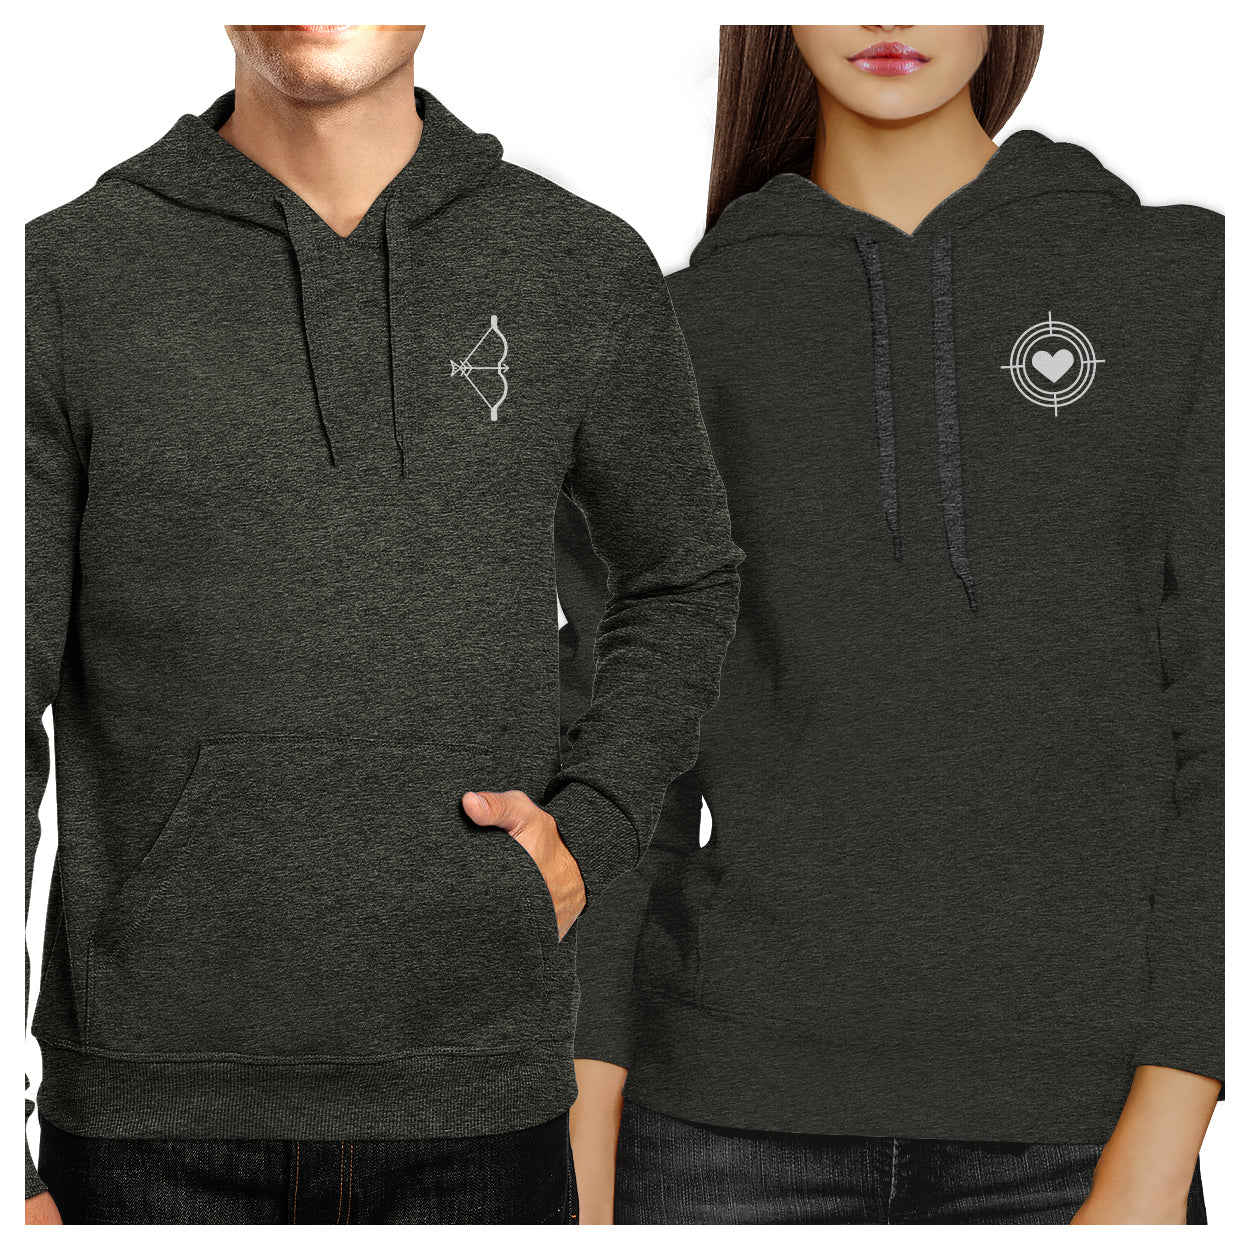 Bow And Arrow To Heart Target Matching Couple Dark Grey Hoodie